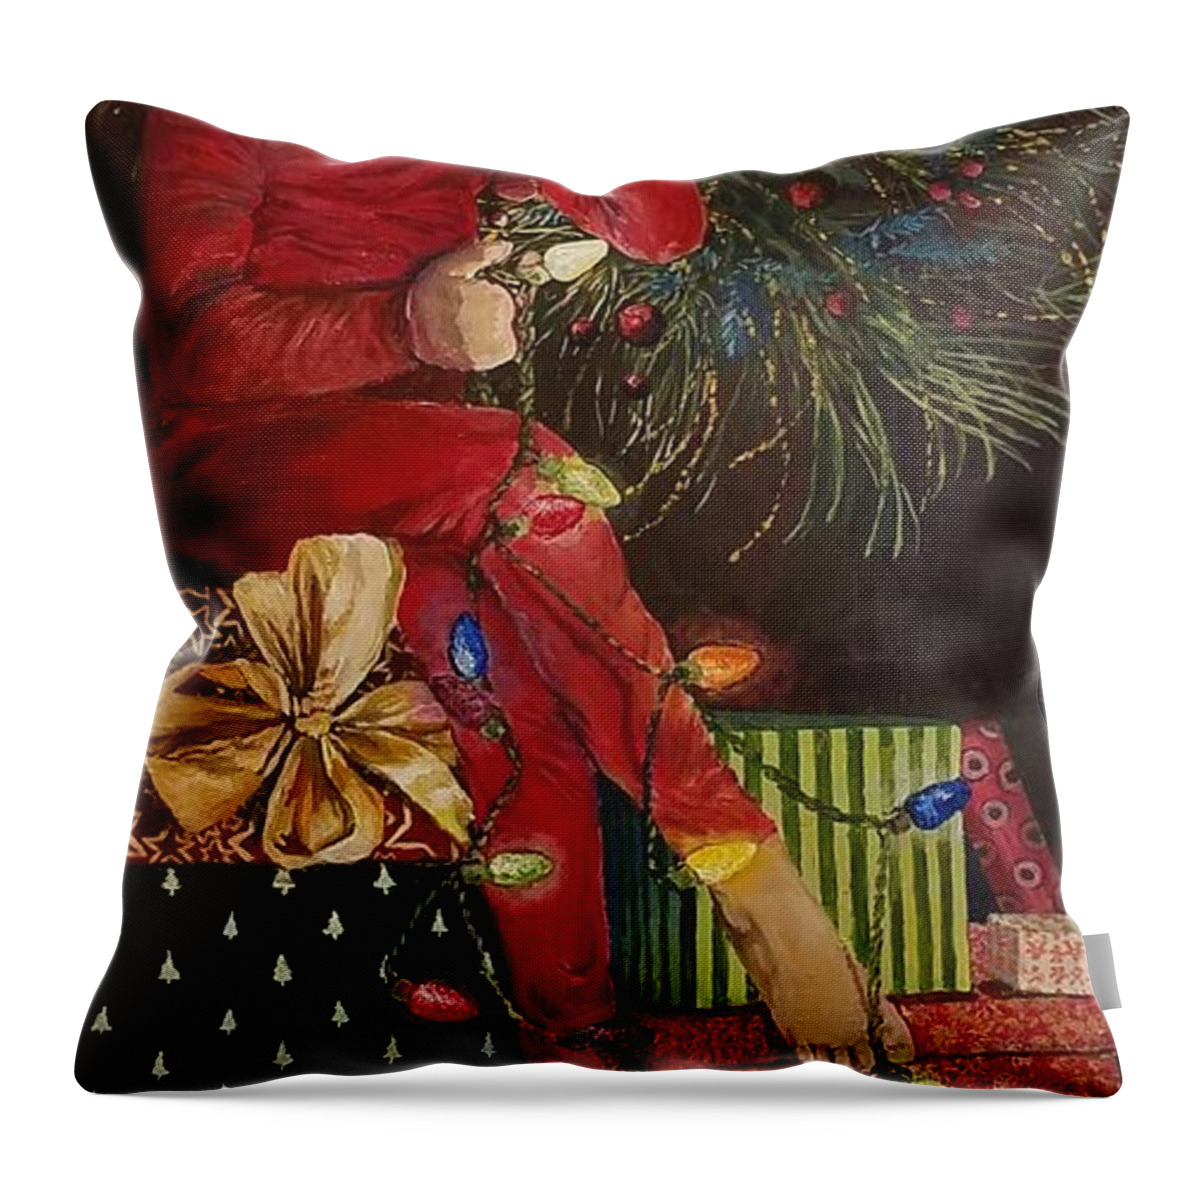 Christmas Throw Pillow featuring the painting Christmas elves by Merana Cadorette